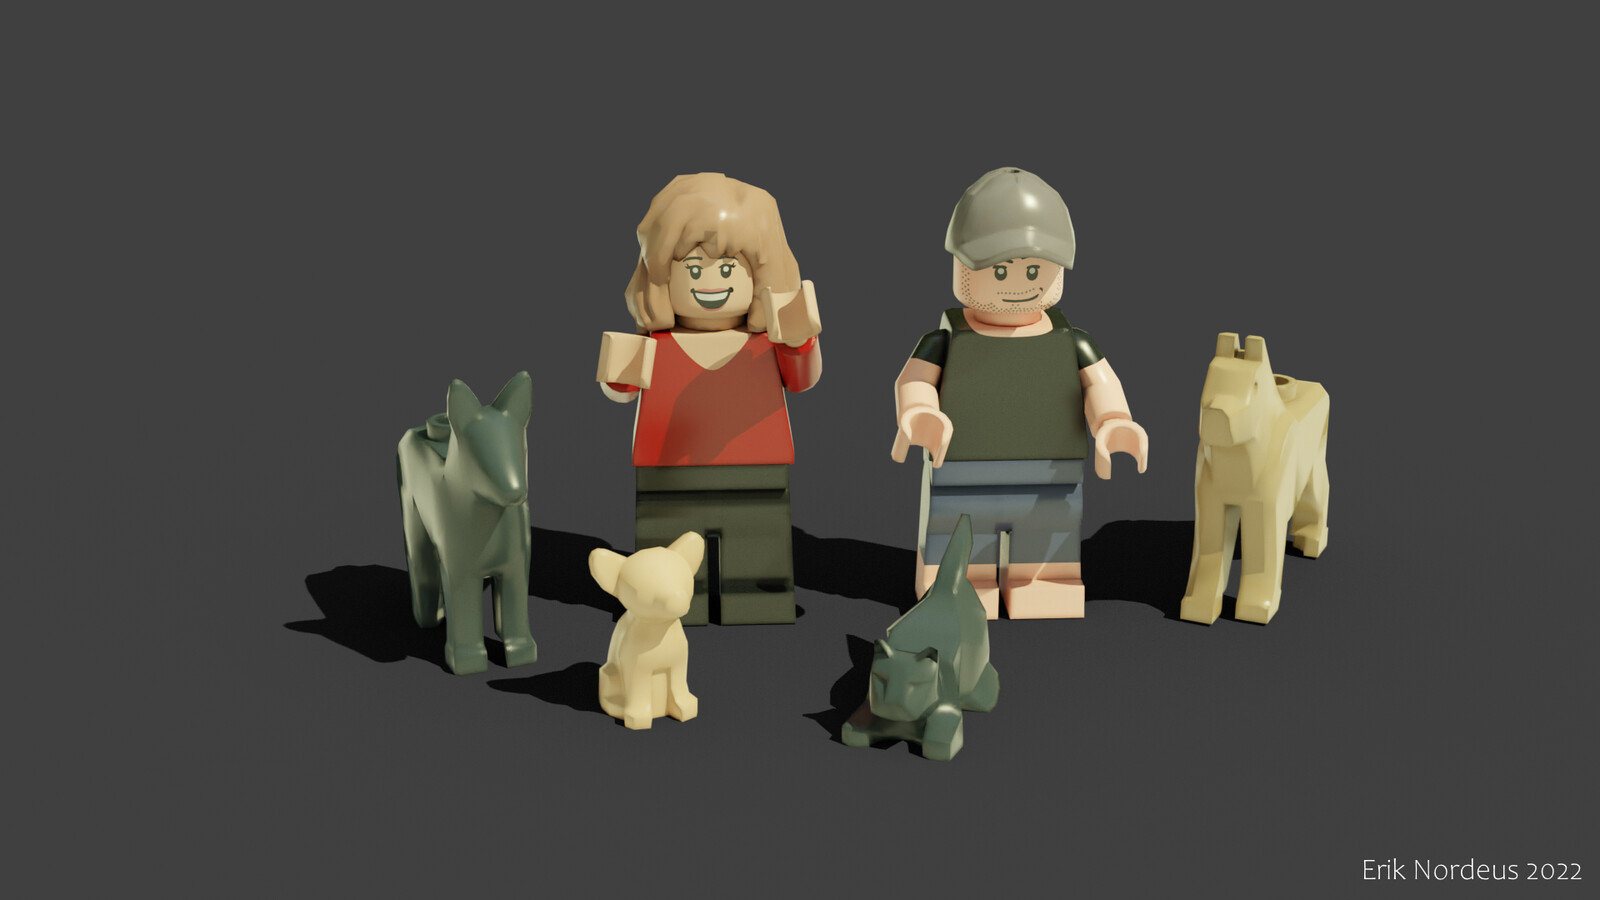 South African streamers LEGO minifigures and their four pets